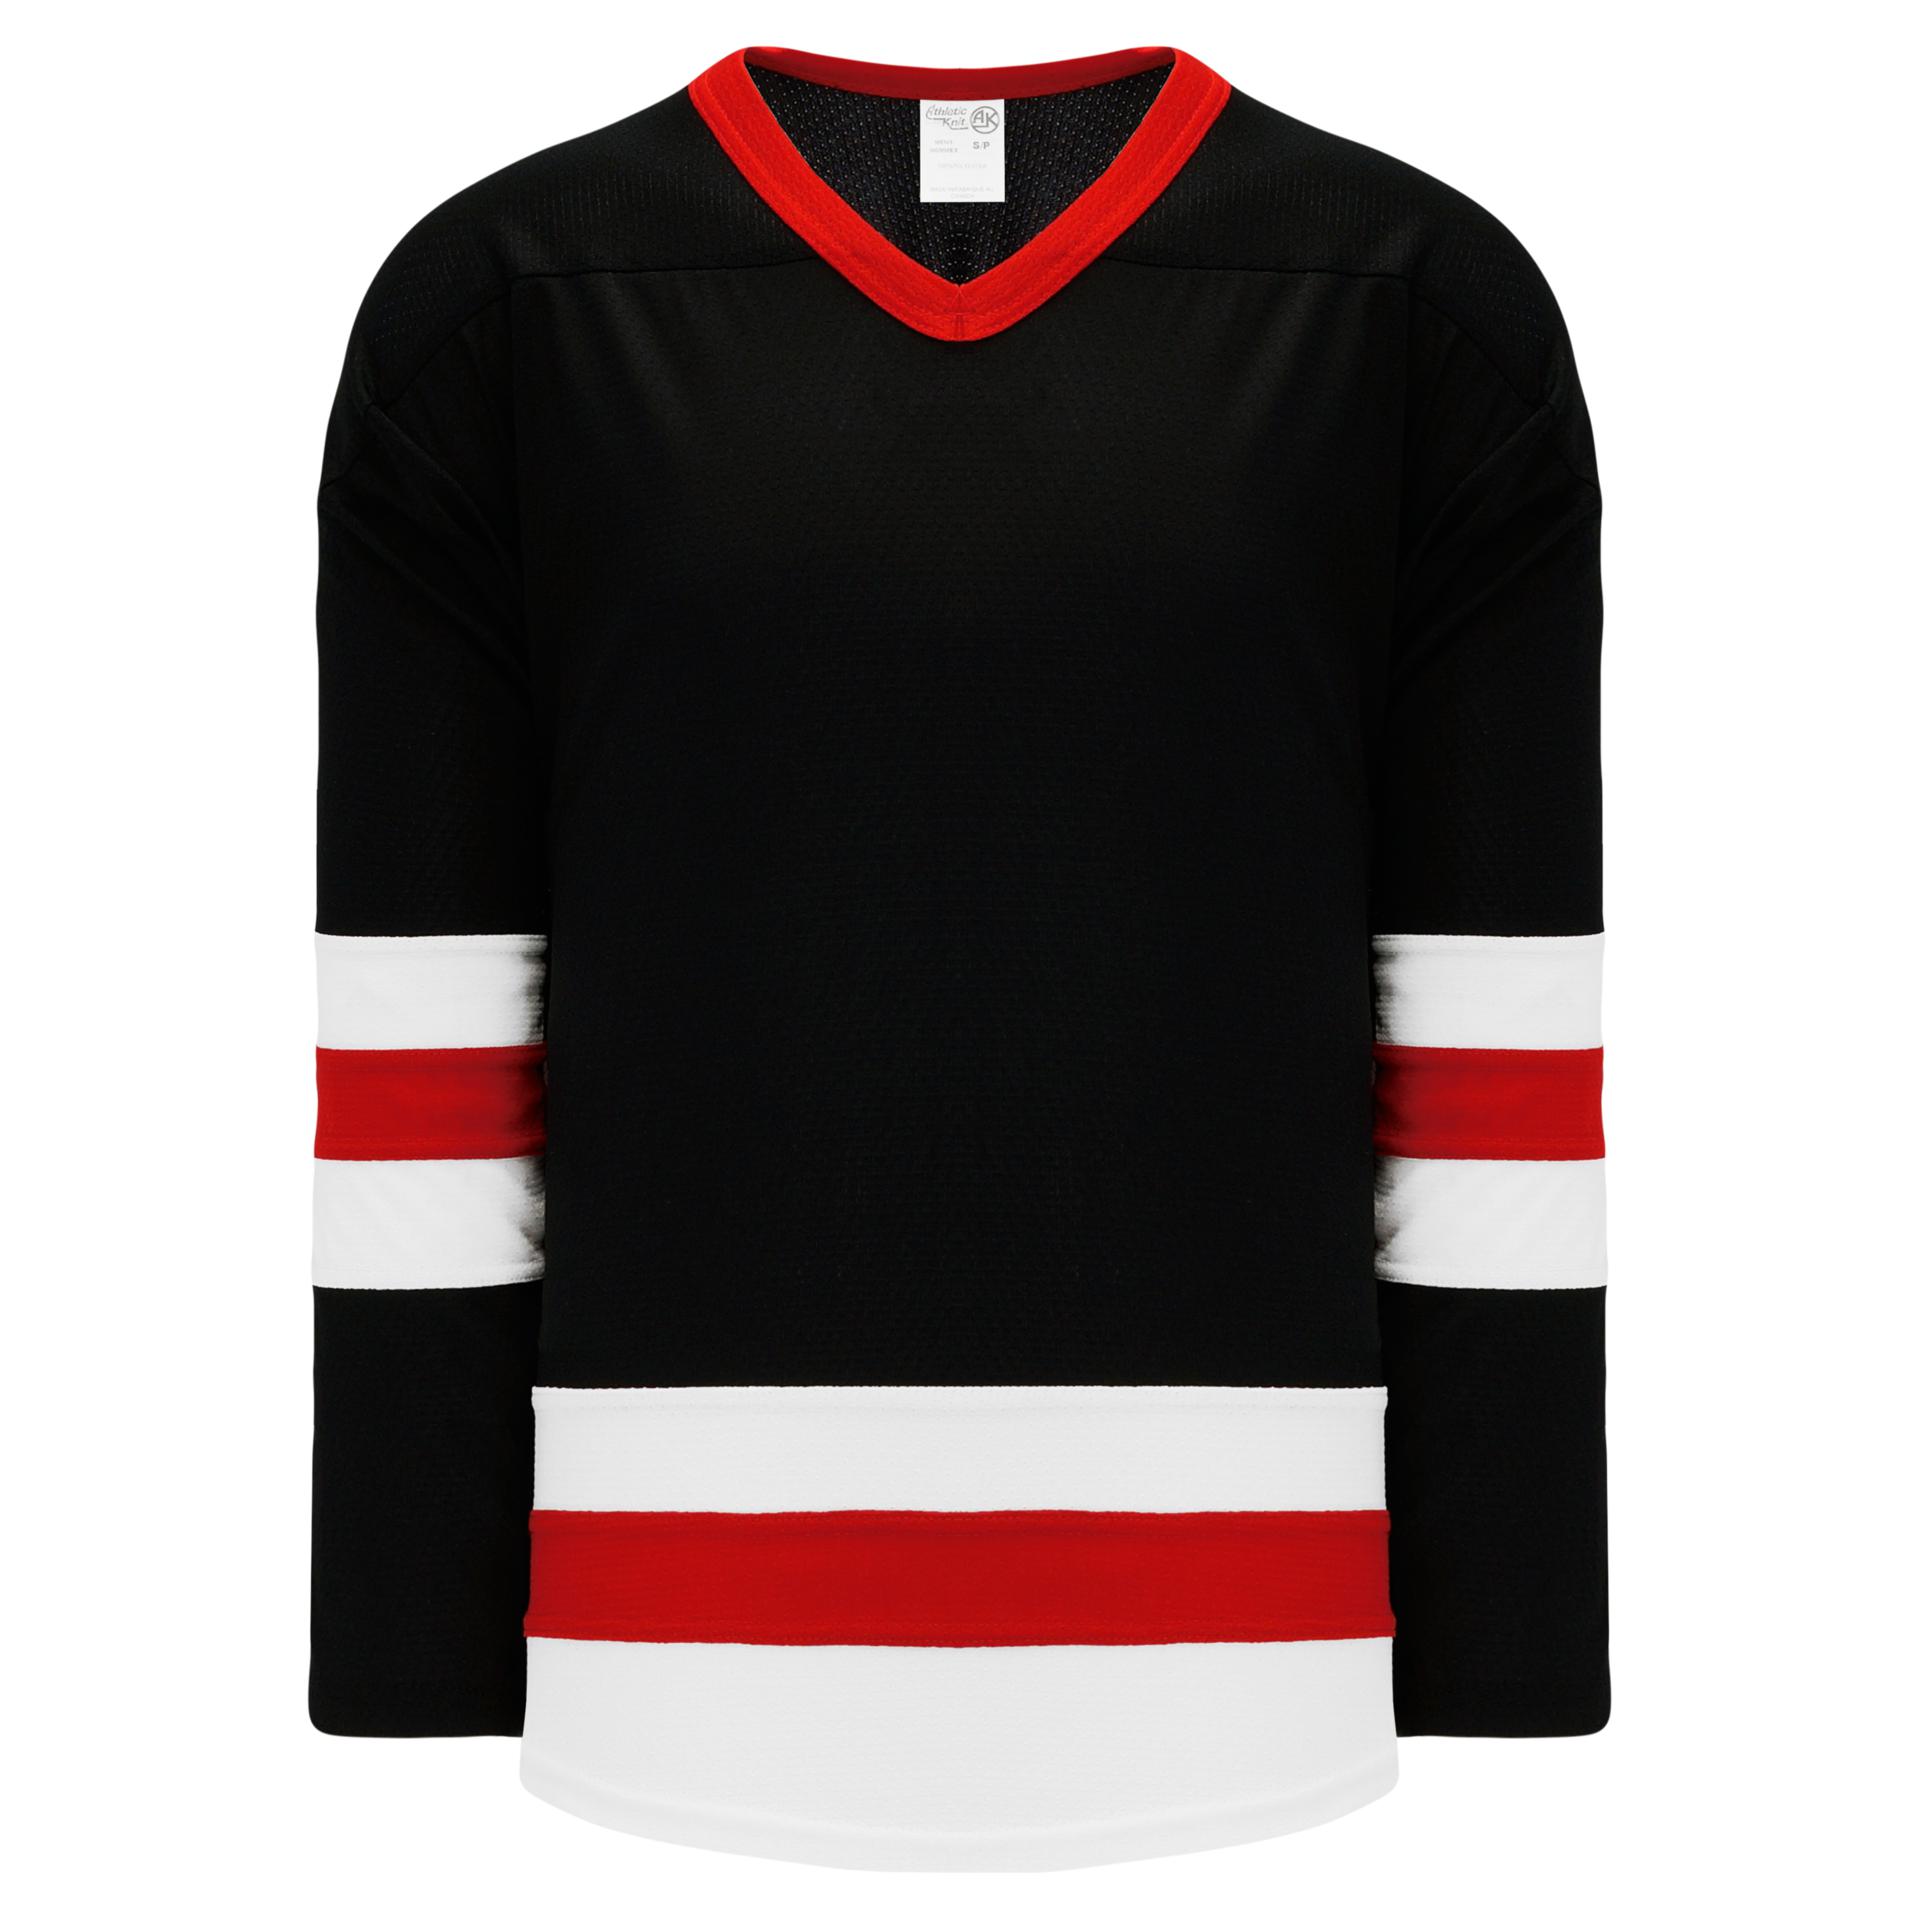 H6500-348 Black/White/Red League Style Blank Hockey Jerseys adult 2XL